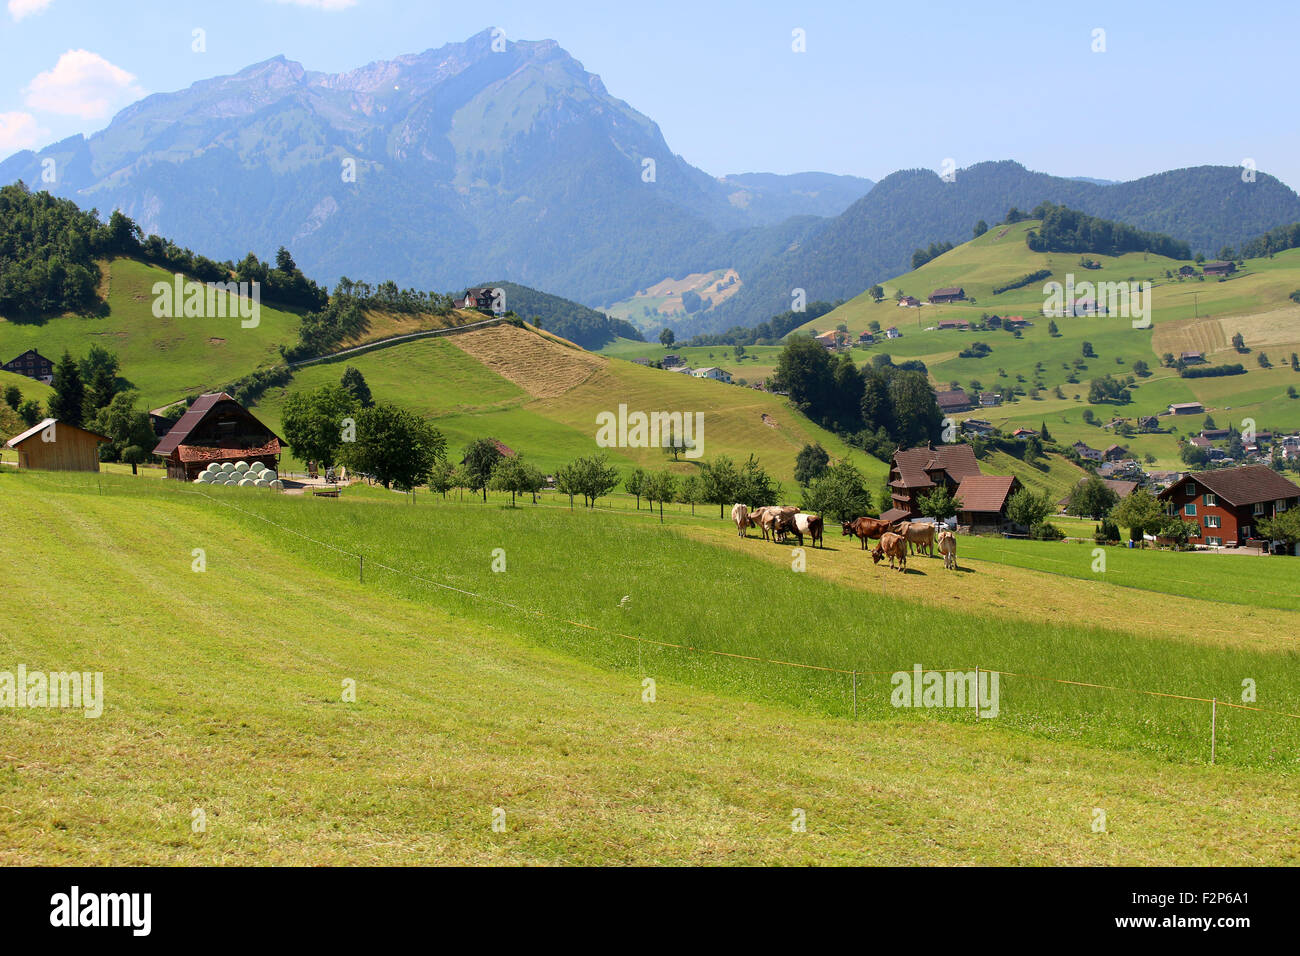 The Alps mountains in Switzerland on Mount Stastenhorn near Lucerne showing town and green pasture valley Stock Photo